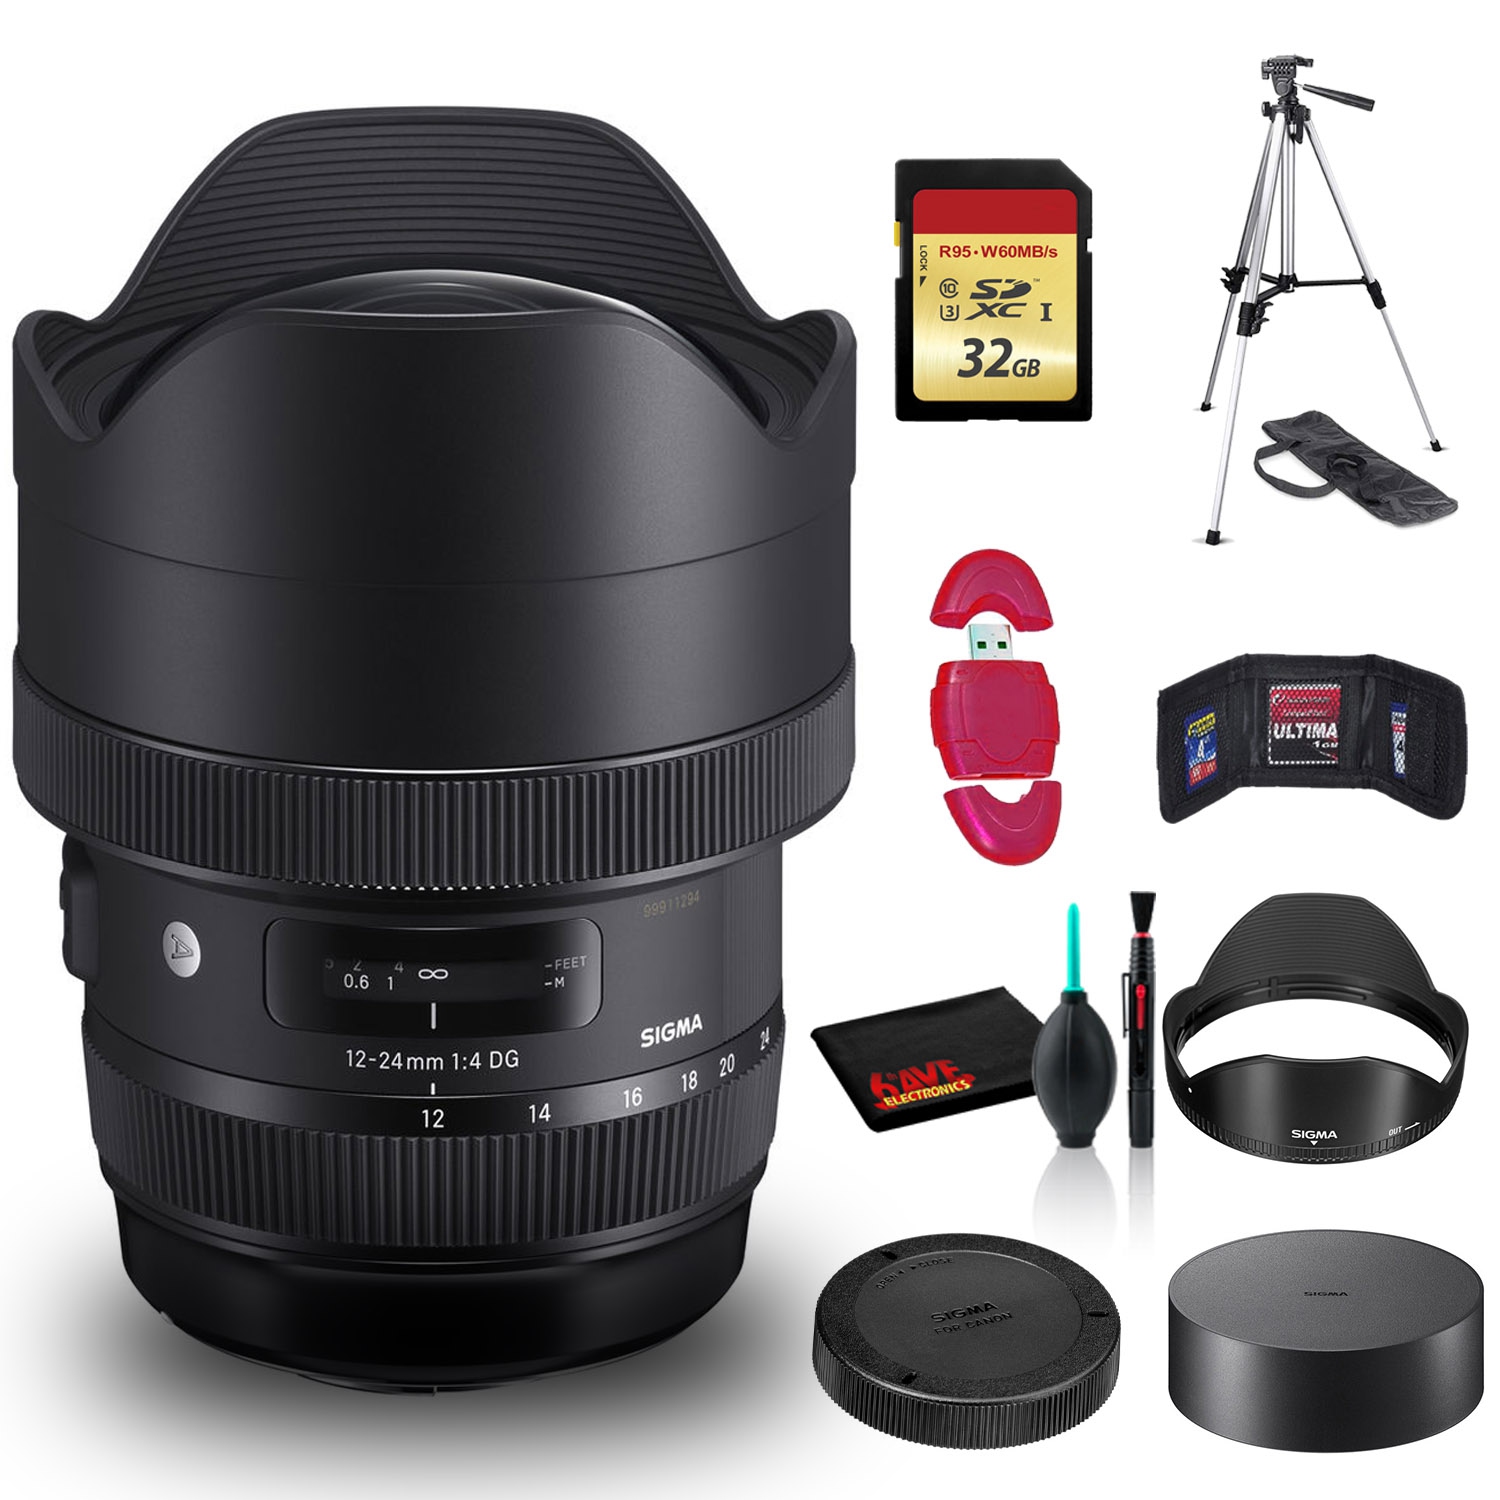 Sigma 12-24mm f/4 DG HSM Art Lens for Nikon F with Cleaning Kit, 57" Full Size Tripod, and 32GB Memory Card Kit Bundle